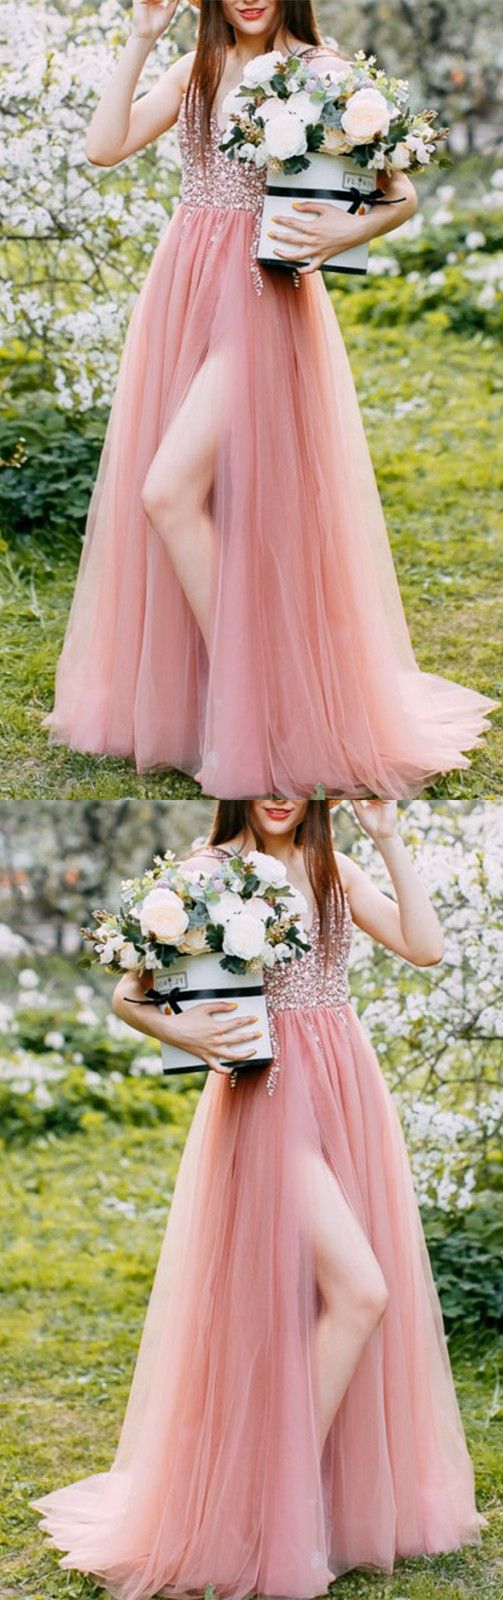 tulle prom dresses,pink prom dresses,tulle evening gowns,split prom dresses,long evening dress cg2072